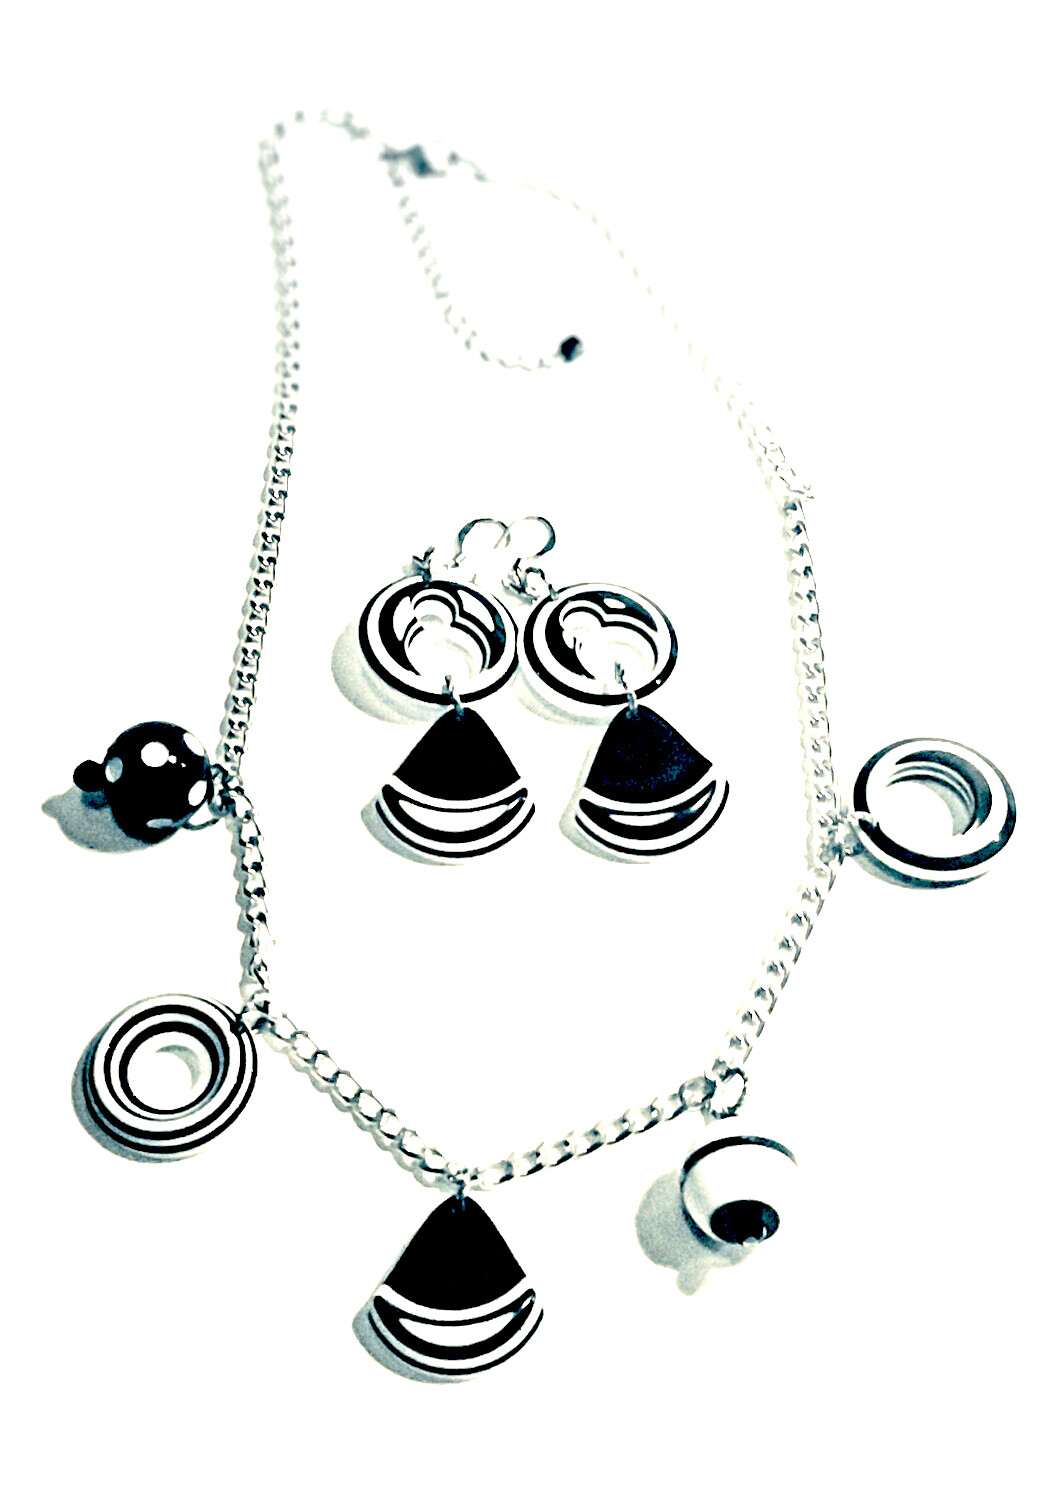 Necklace | Earrings Black And White